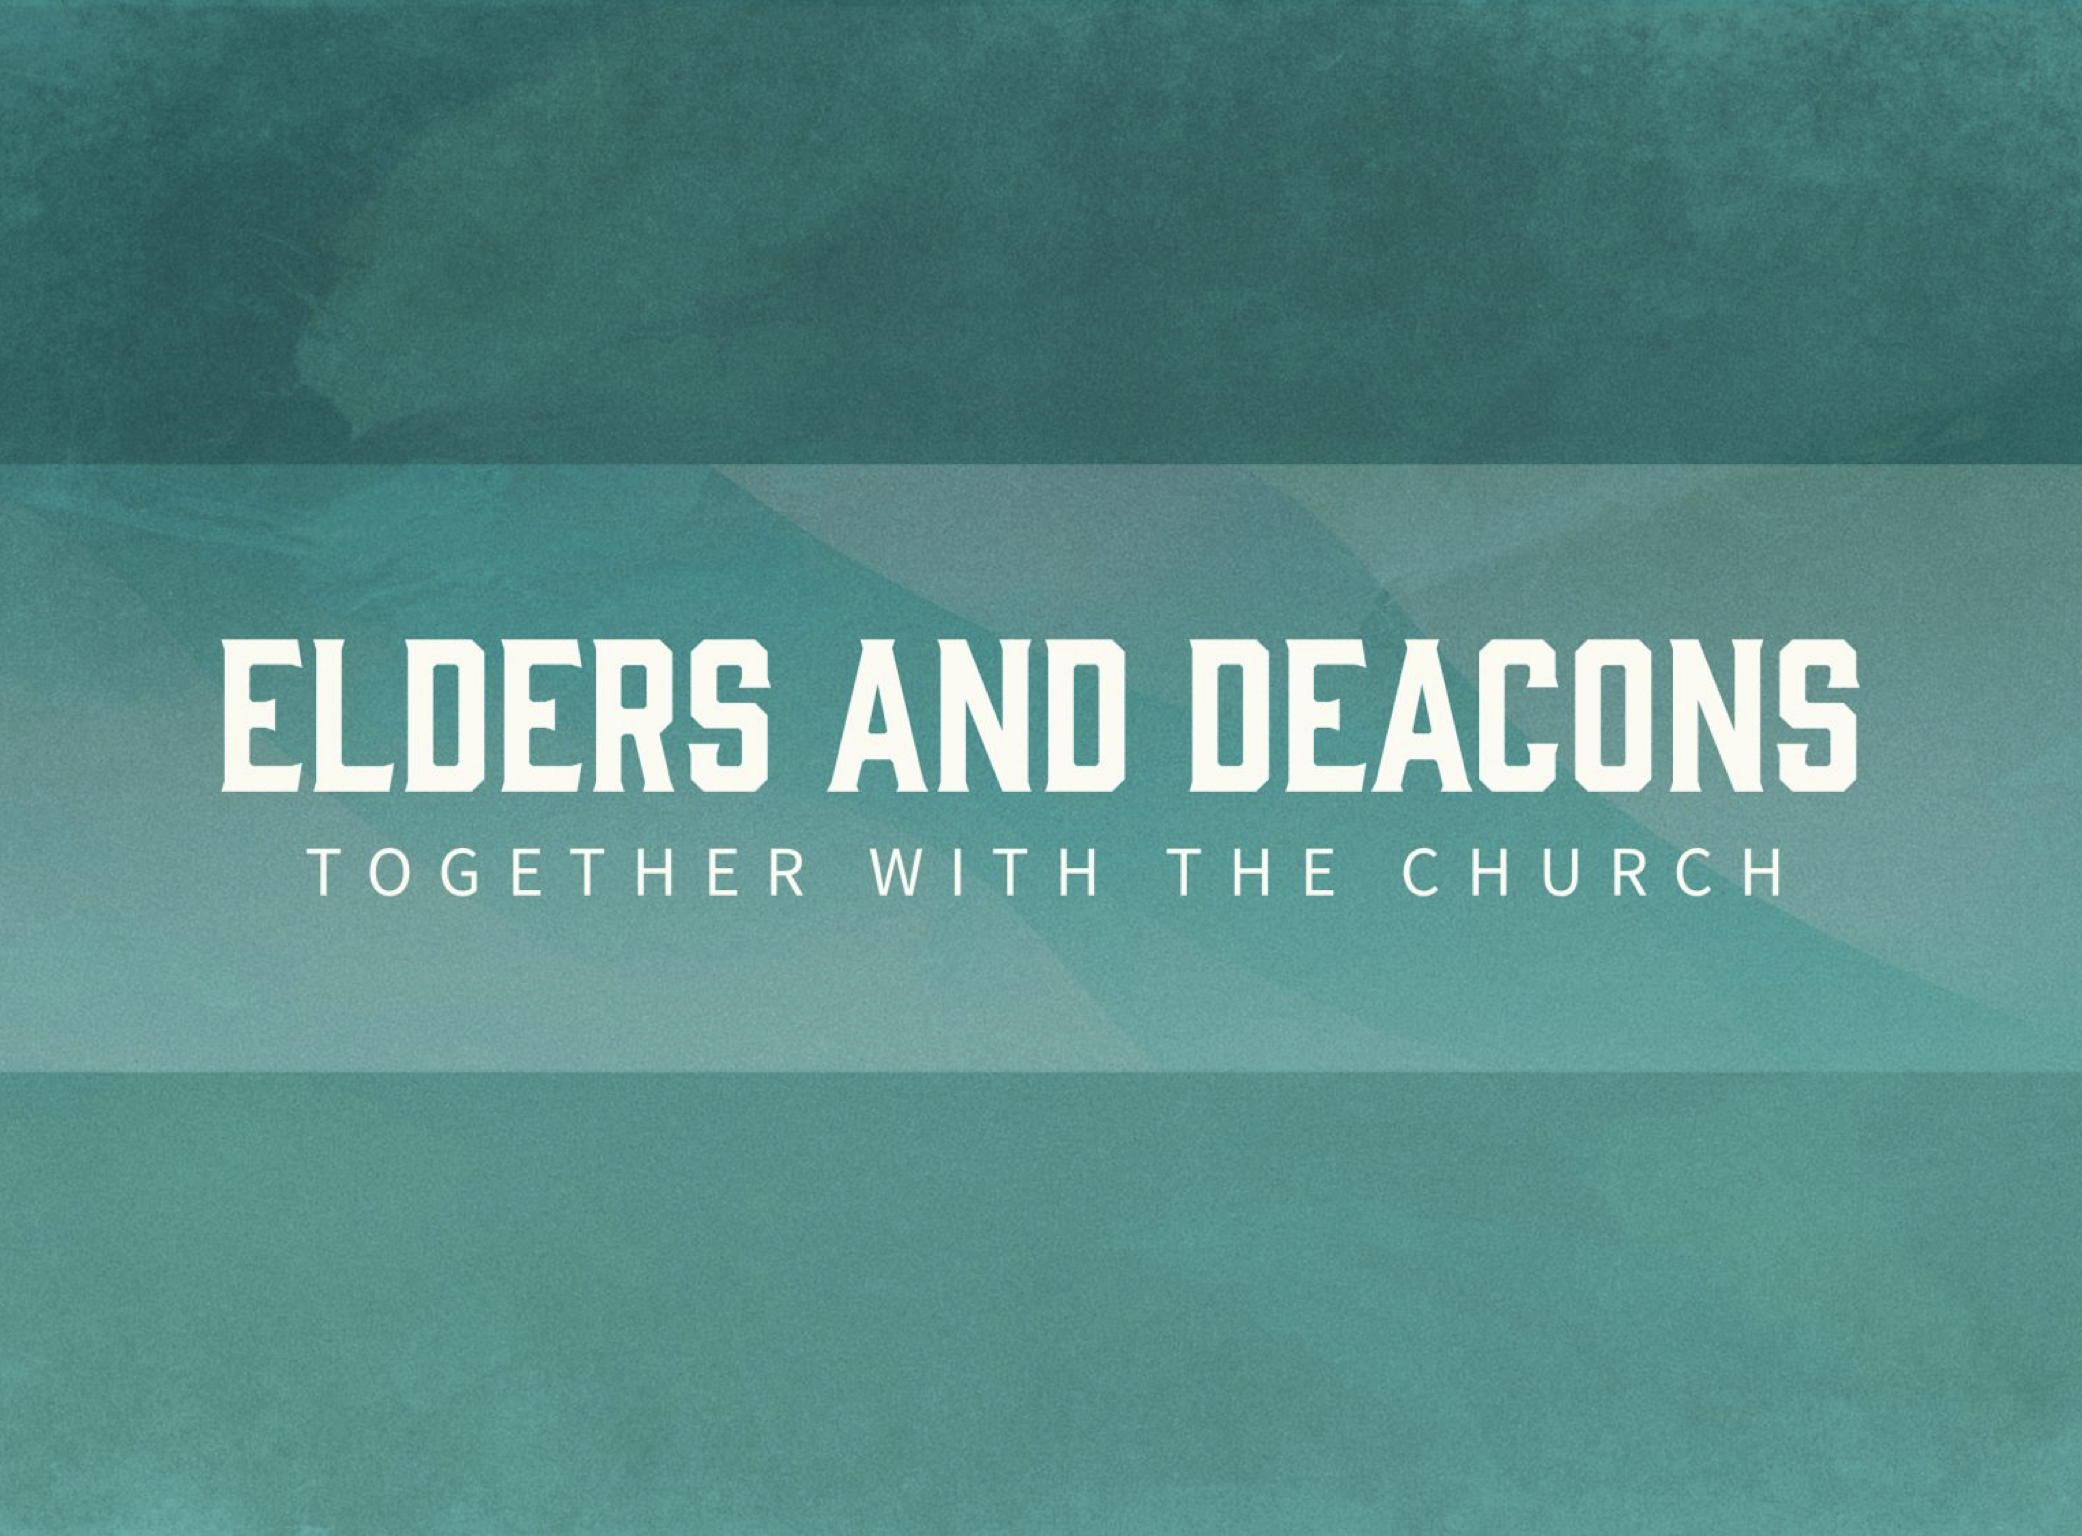 Who Can Be A Deacon?